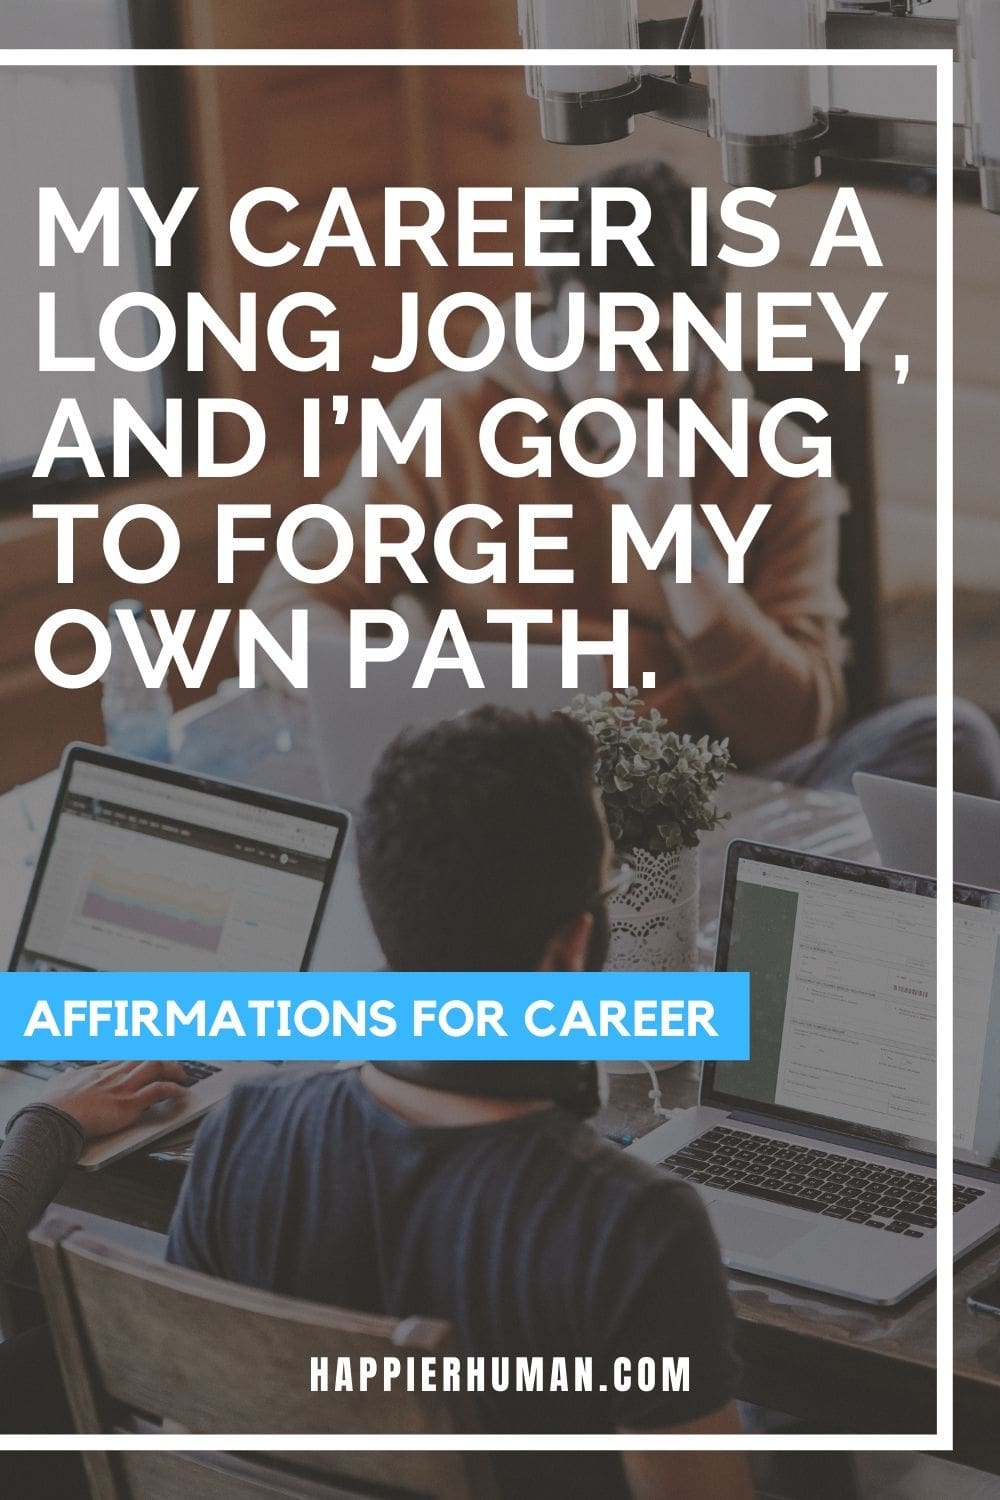 Affirmations for Your Career - My career is a long journey, and I’m going to forge my own path. | affirmations for work anxiety | short positive affirmations for work | affirmations for job and money